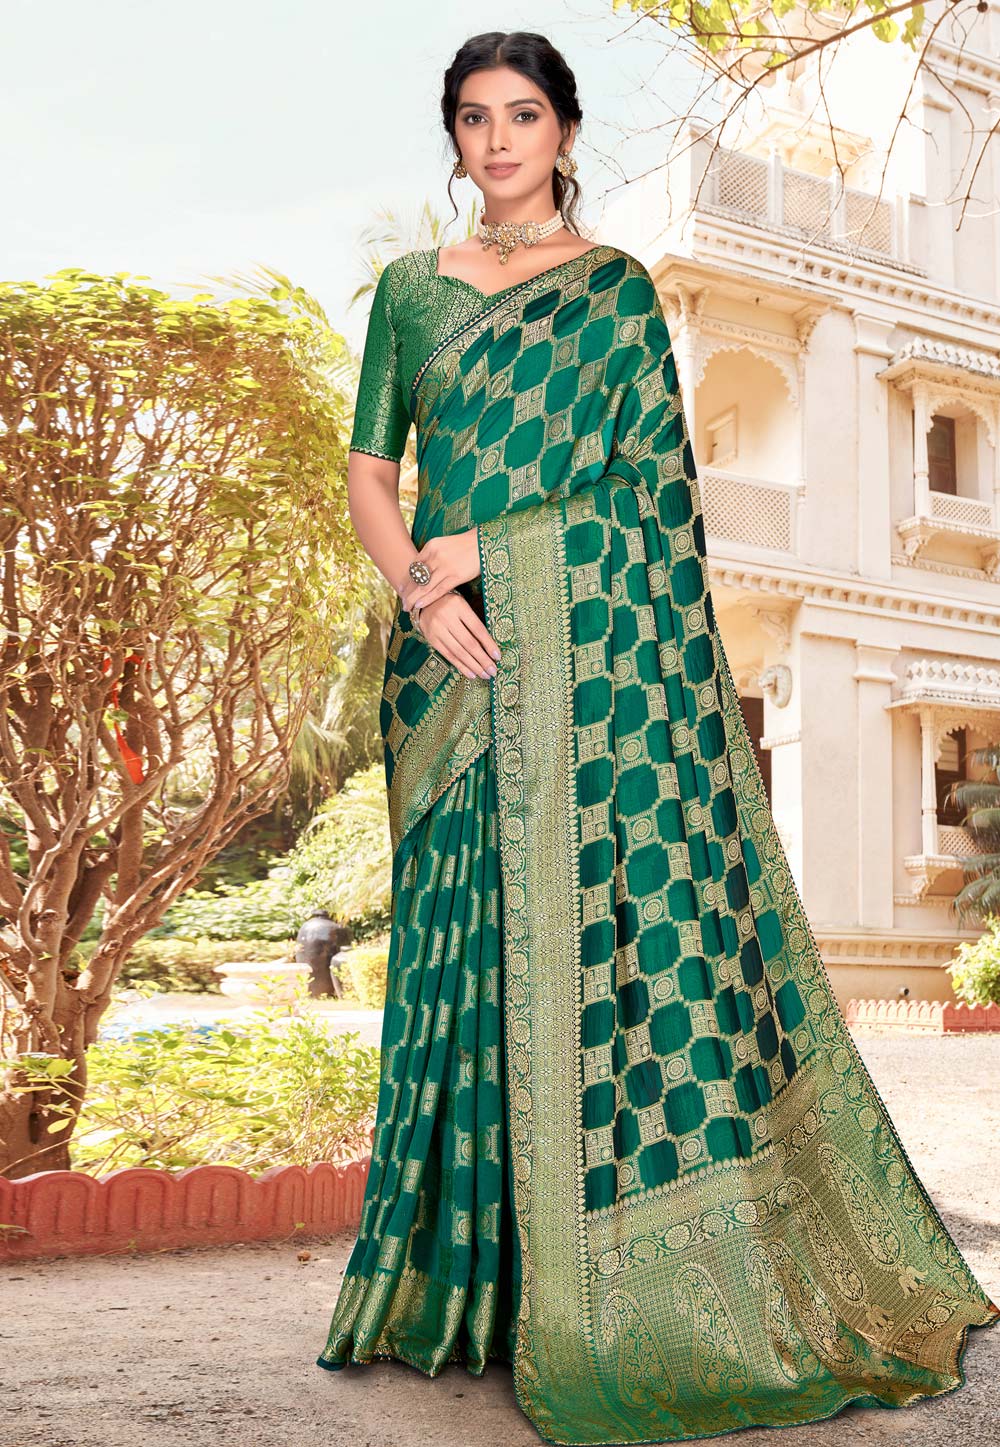 5 Latest Party Wear Sarees Range From $200 - $300 In Amazon